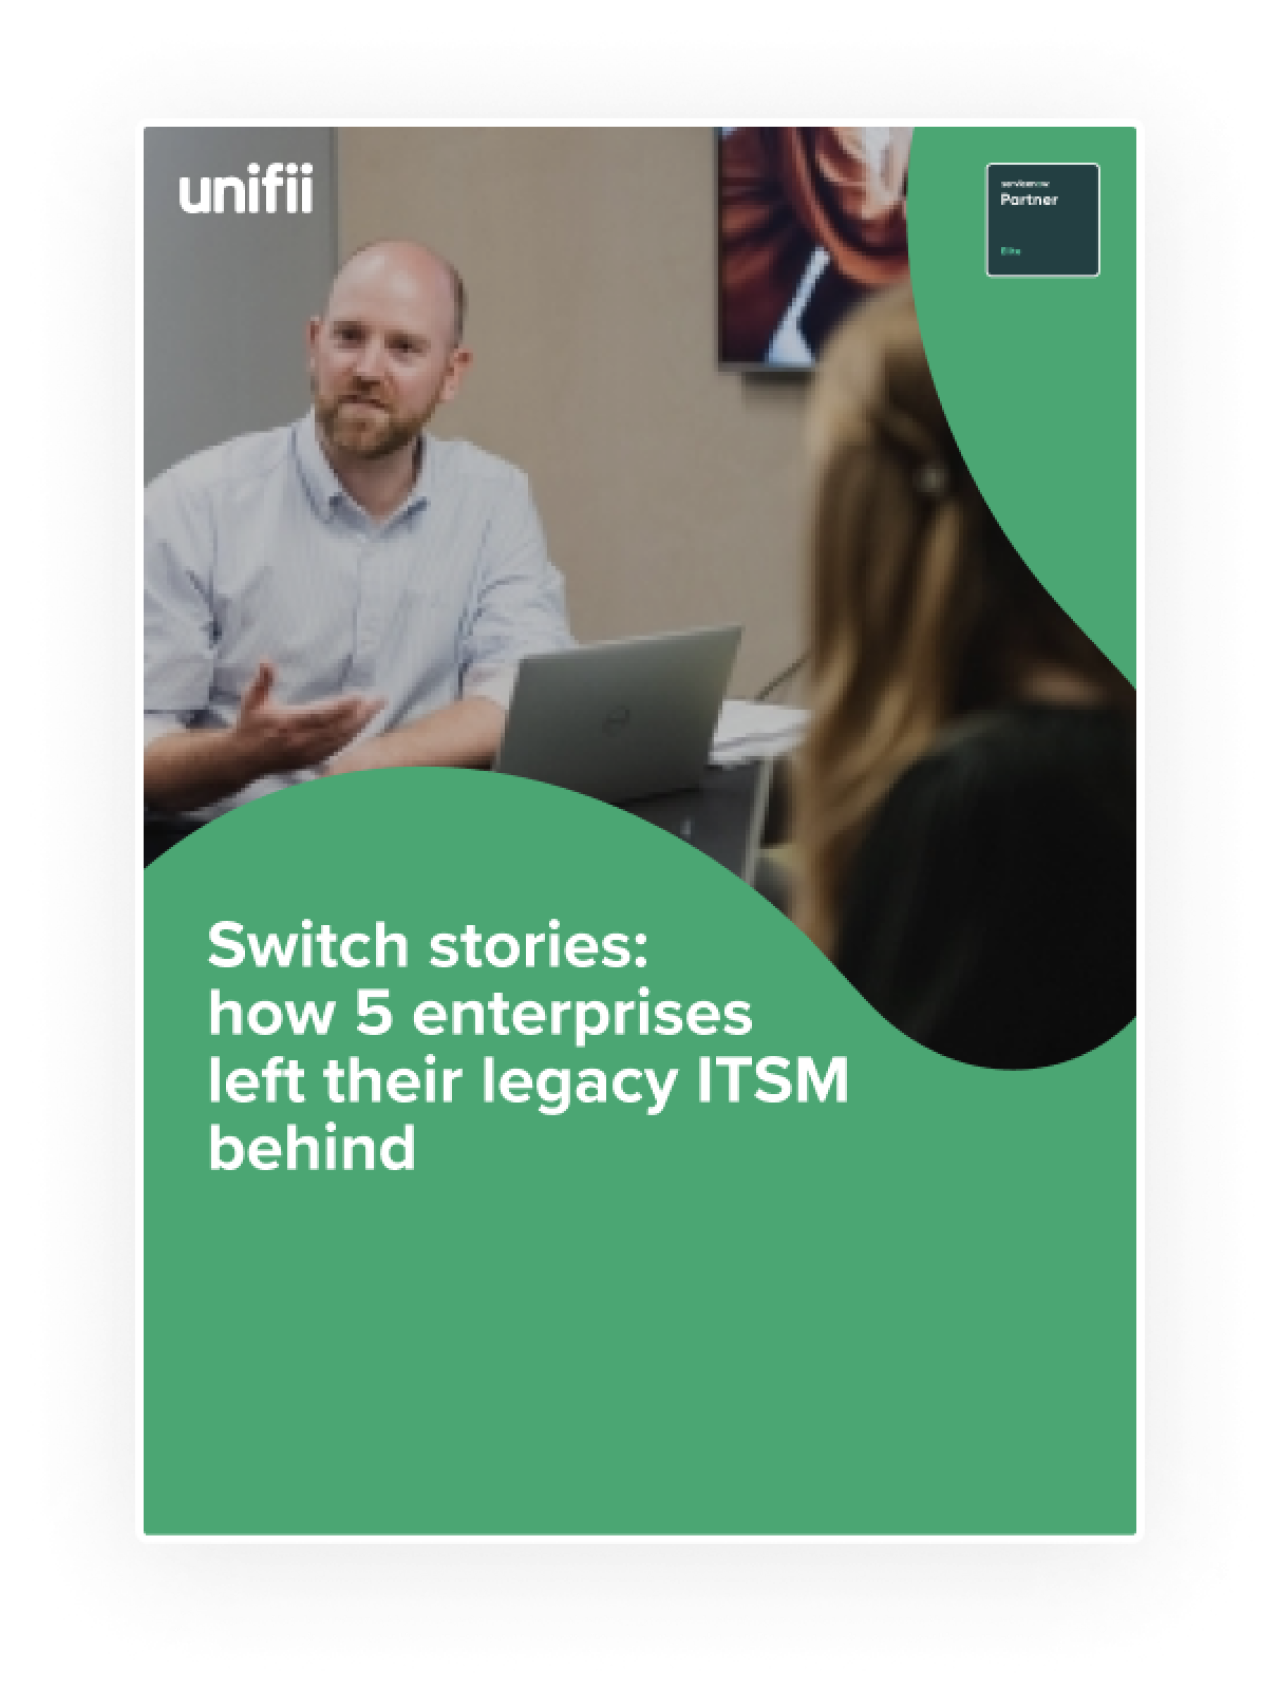 Switch stories: how 5 enterprises left their legacy ITSM behind.